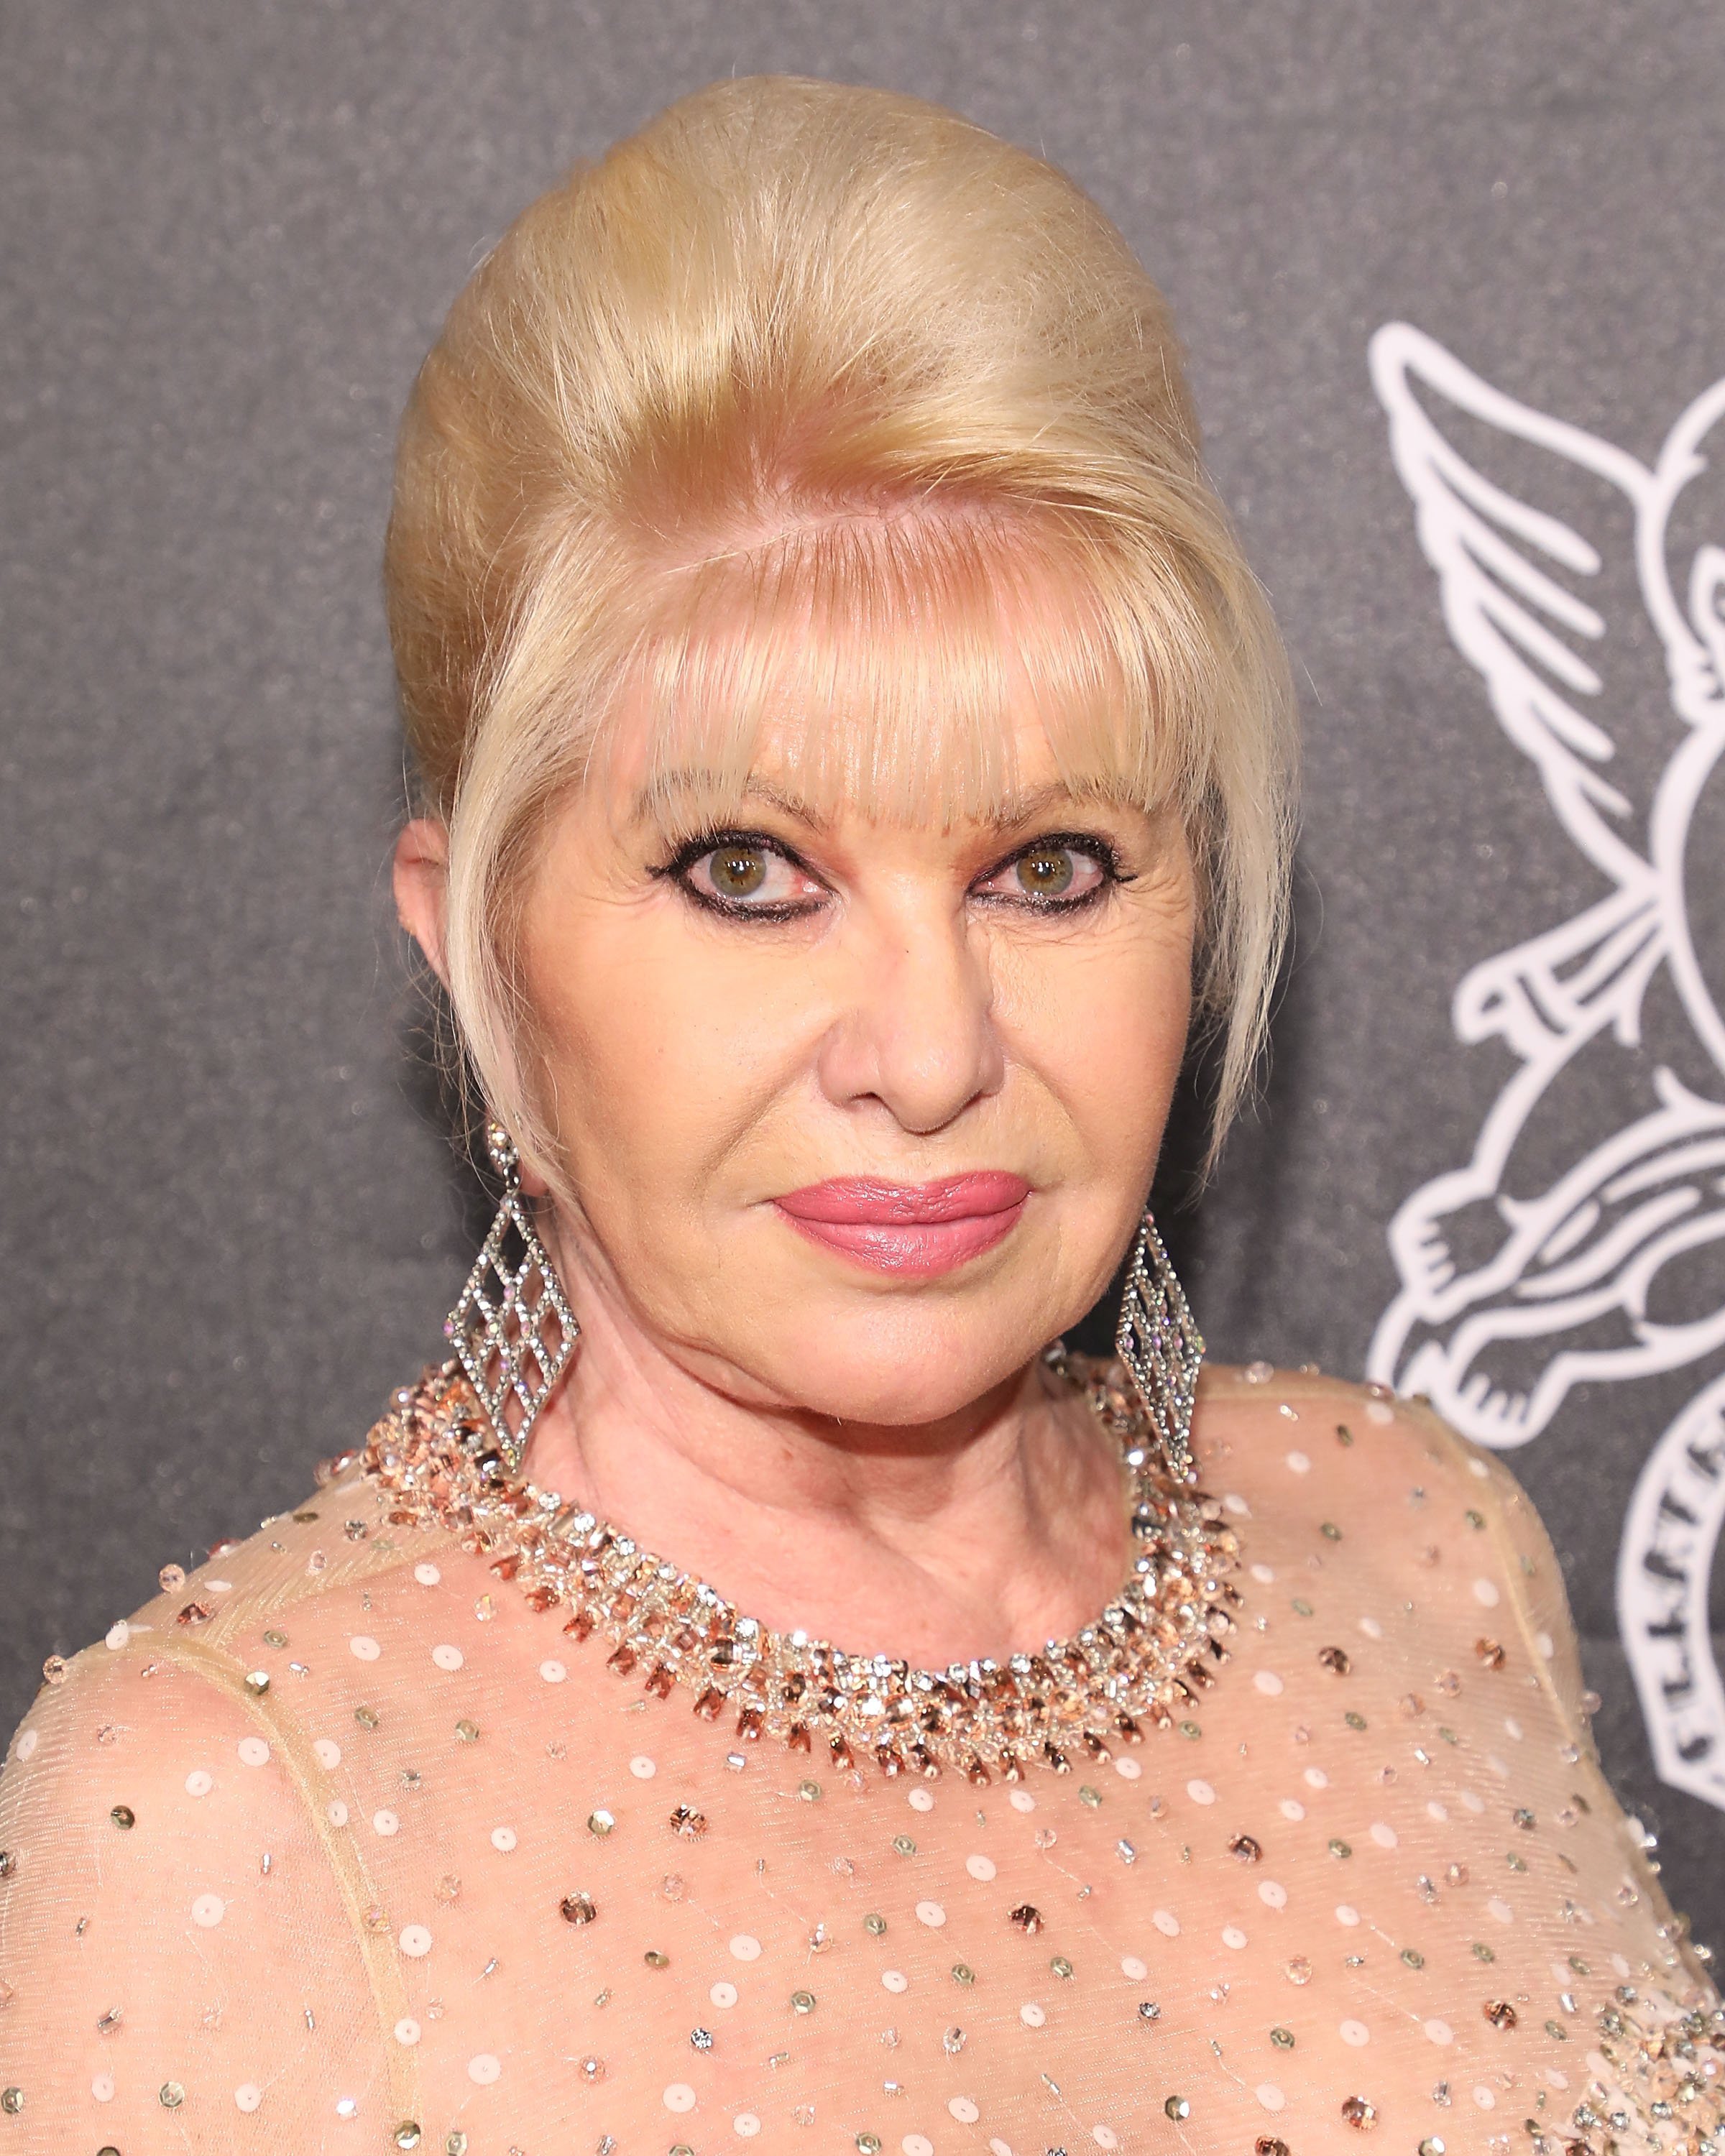 Ivana Trump attends the 2018 Angel Ball at Cipriani Wall Street on October 22, 2018 in New York City | Photo: Getty Images